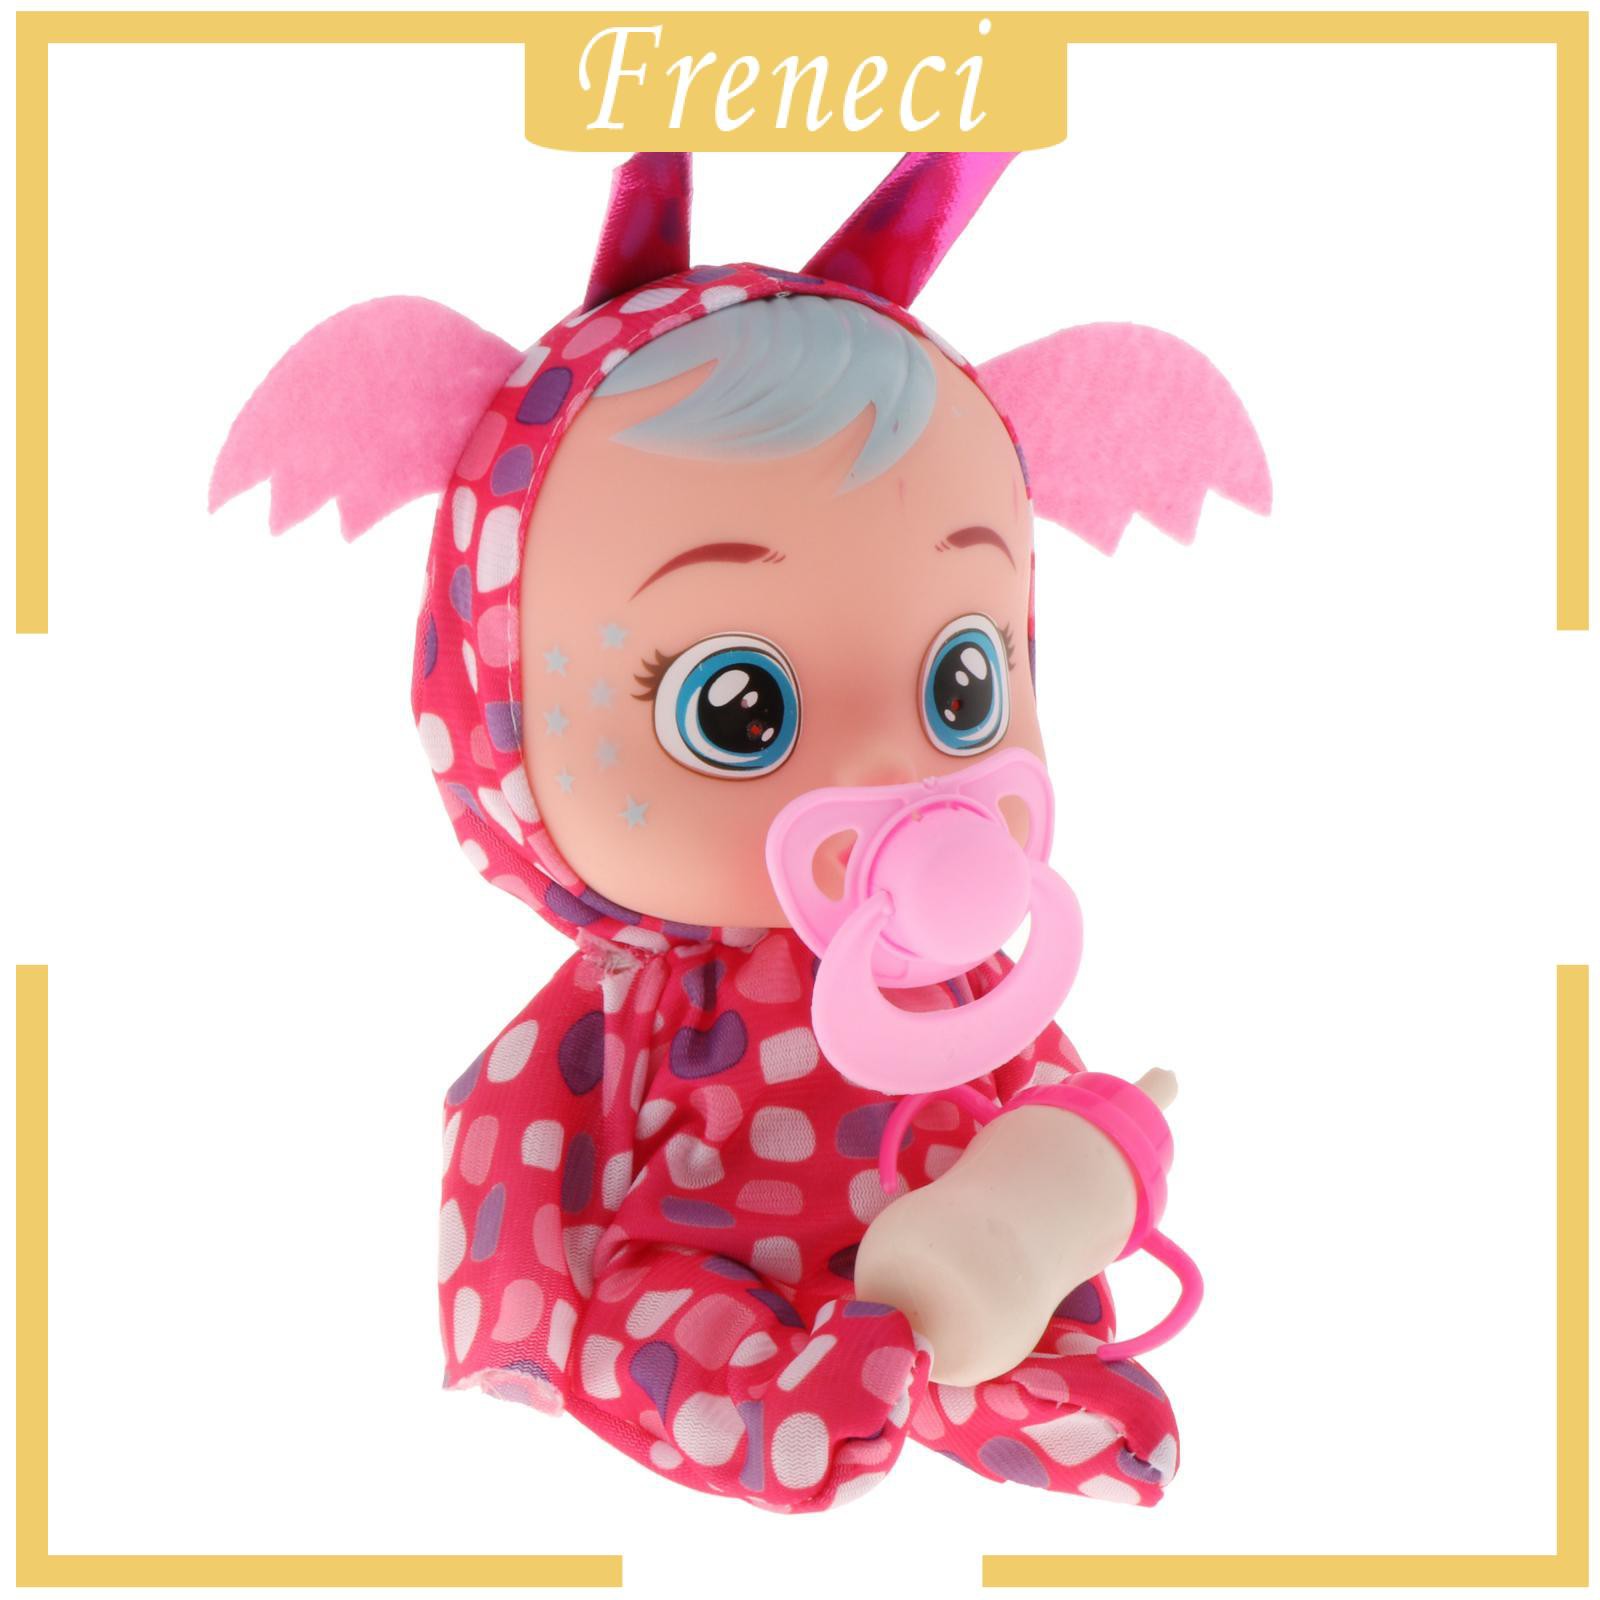 [FRENECI] Baby Alive Dolls Interactive Crying Baby Doll for Girls and Boys Aged 3 and Up Birthday Gift Interactive Dolls Toys